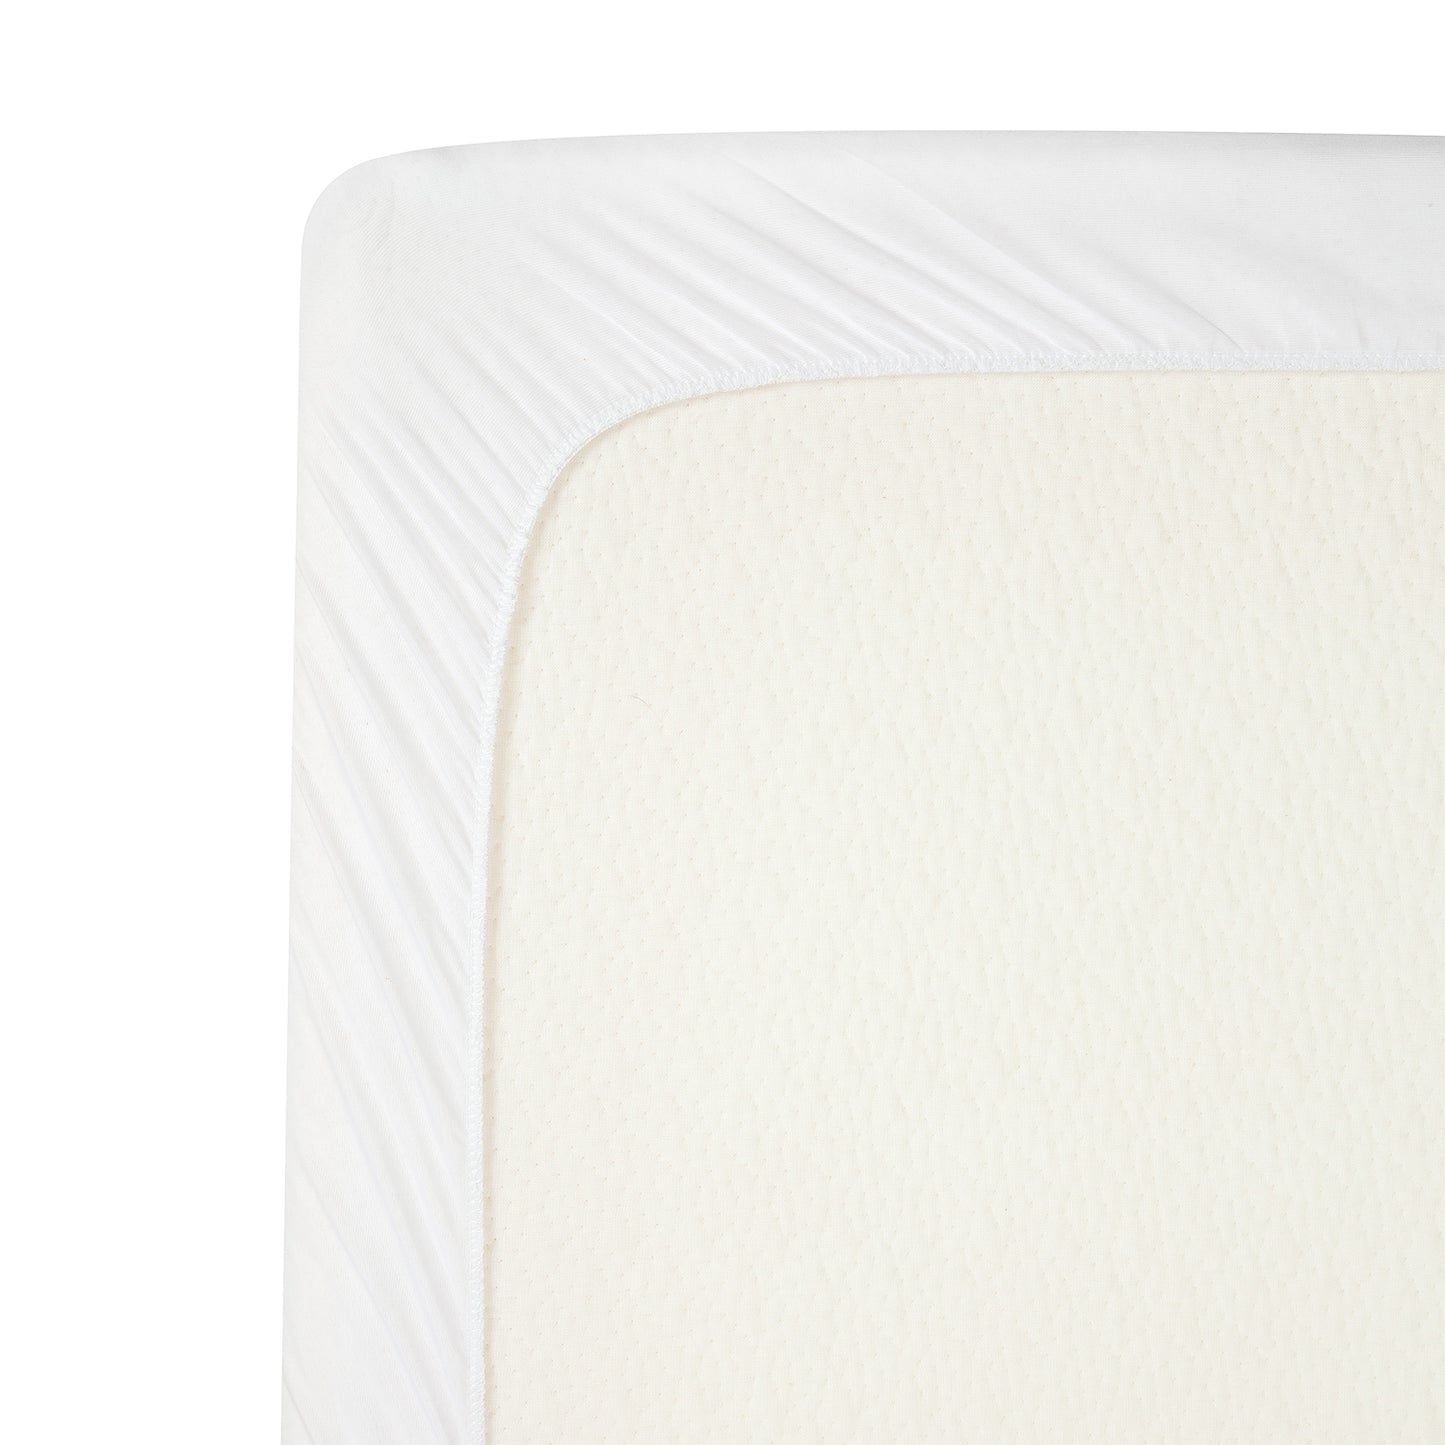 Tencel Waterproof Fitted Cot Mattress Protector - 120x60 cm